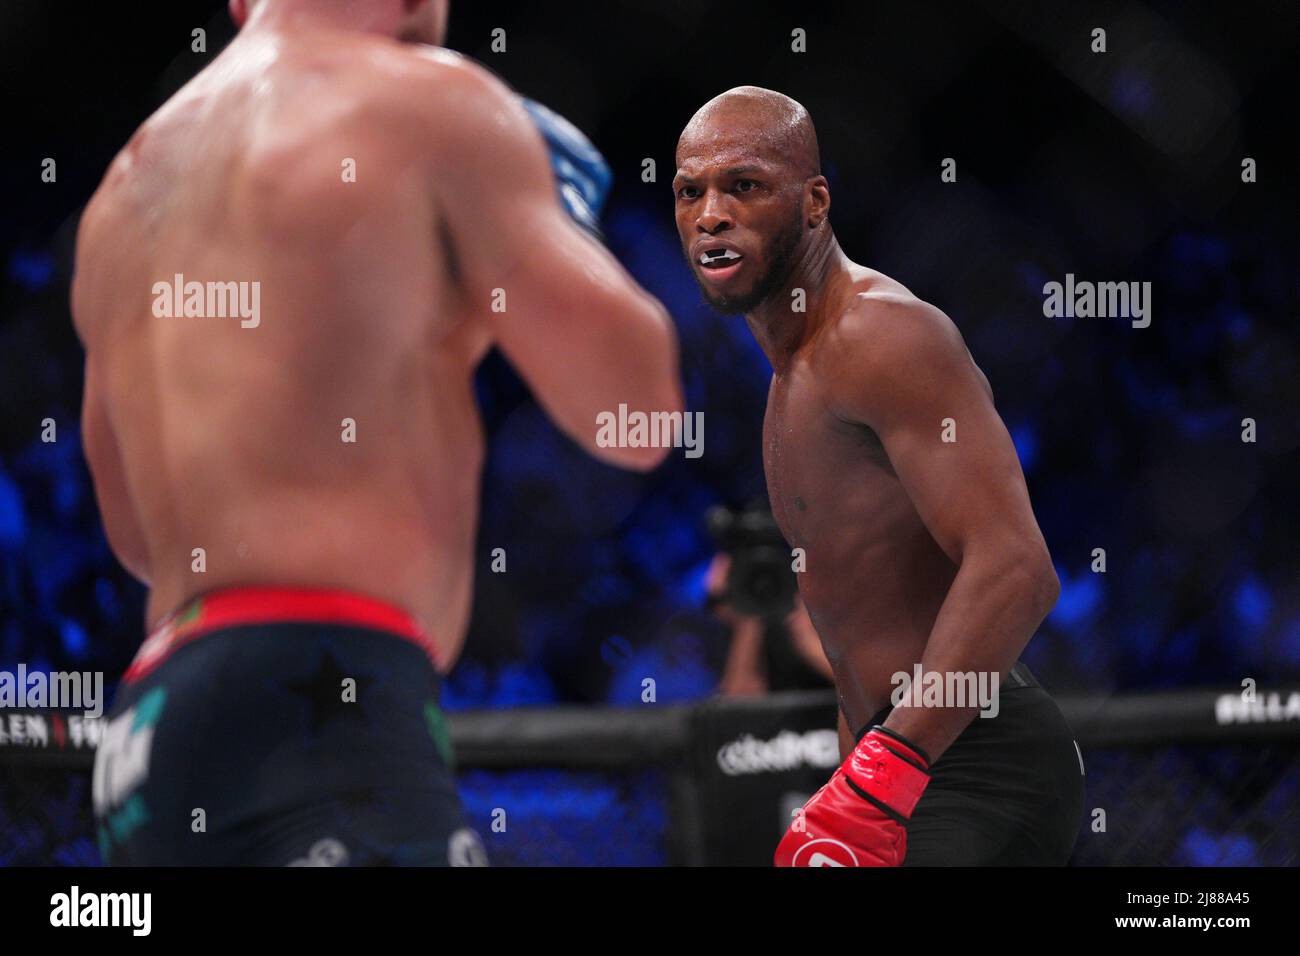 London, UK. 13th May, 2022. LONDON, ENGLAND - MAY 13: Michael “Venom” Page (red gloves) battles Logan Storley (blue gloves) in their welterweight fight during the Bellator 281: MVP v Storley event at SSE Arena on May 13, 2022, in London, England, England. (Photo by Scott Garfitt/PxImages) Credit: Px Images/Alamy Live News Stock Photo